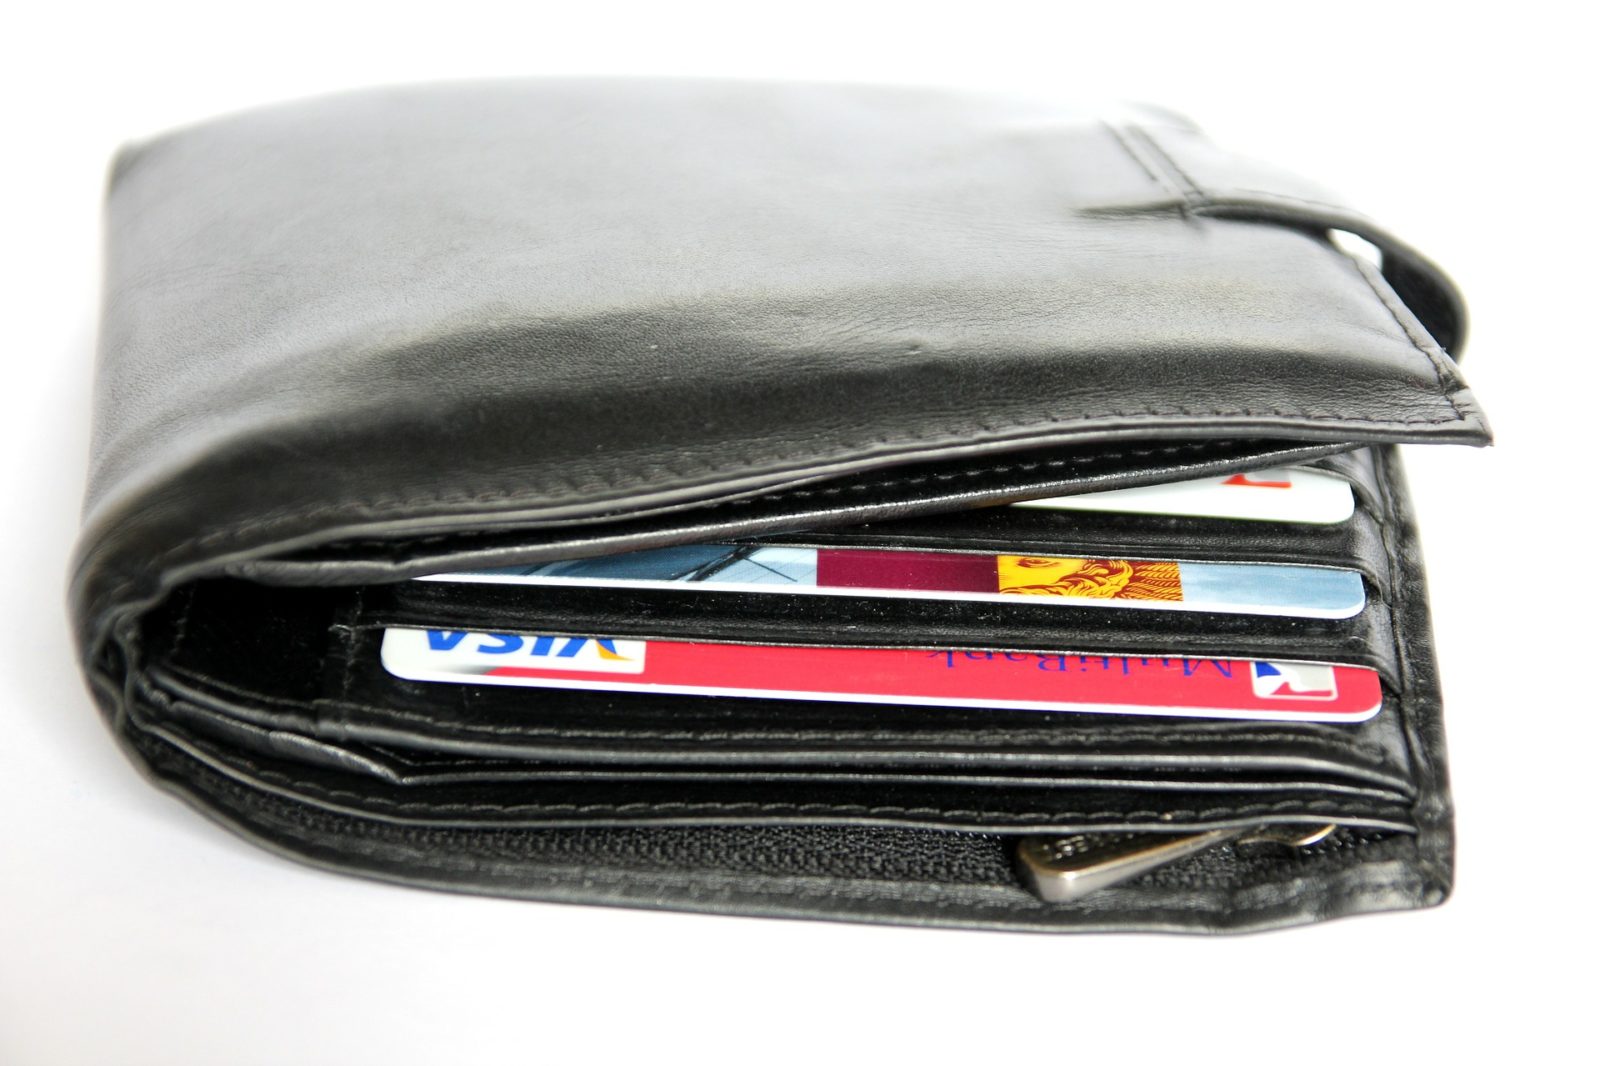 Credit Cards and How to Manage them